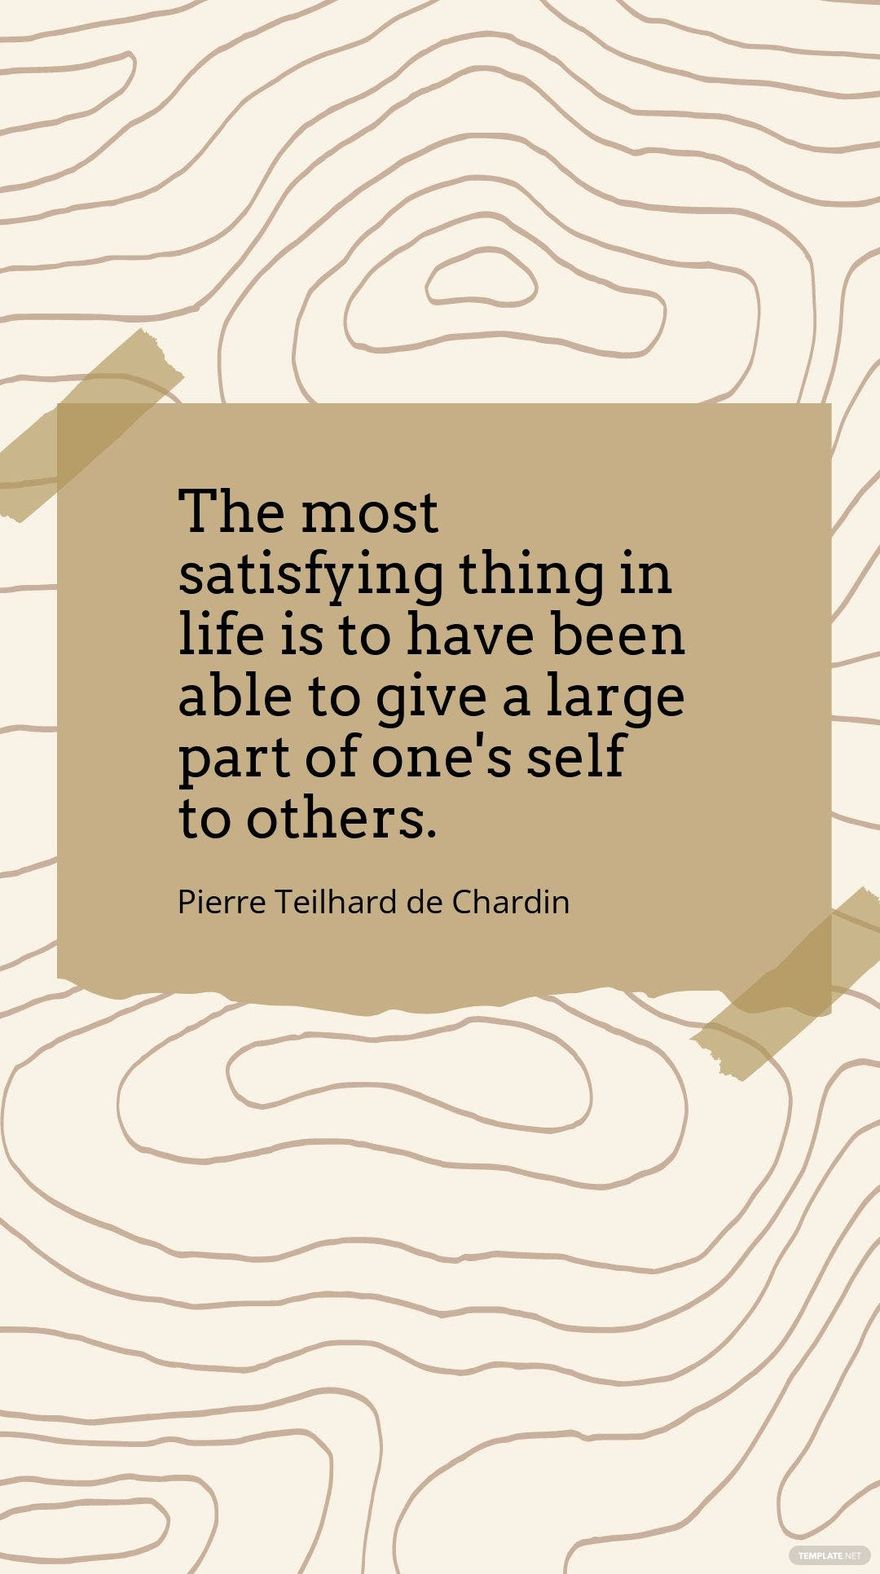 Pierre Teilhard de Chardin - "The most satisfying thing in life is to have been able to give a large part of one's self to others."